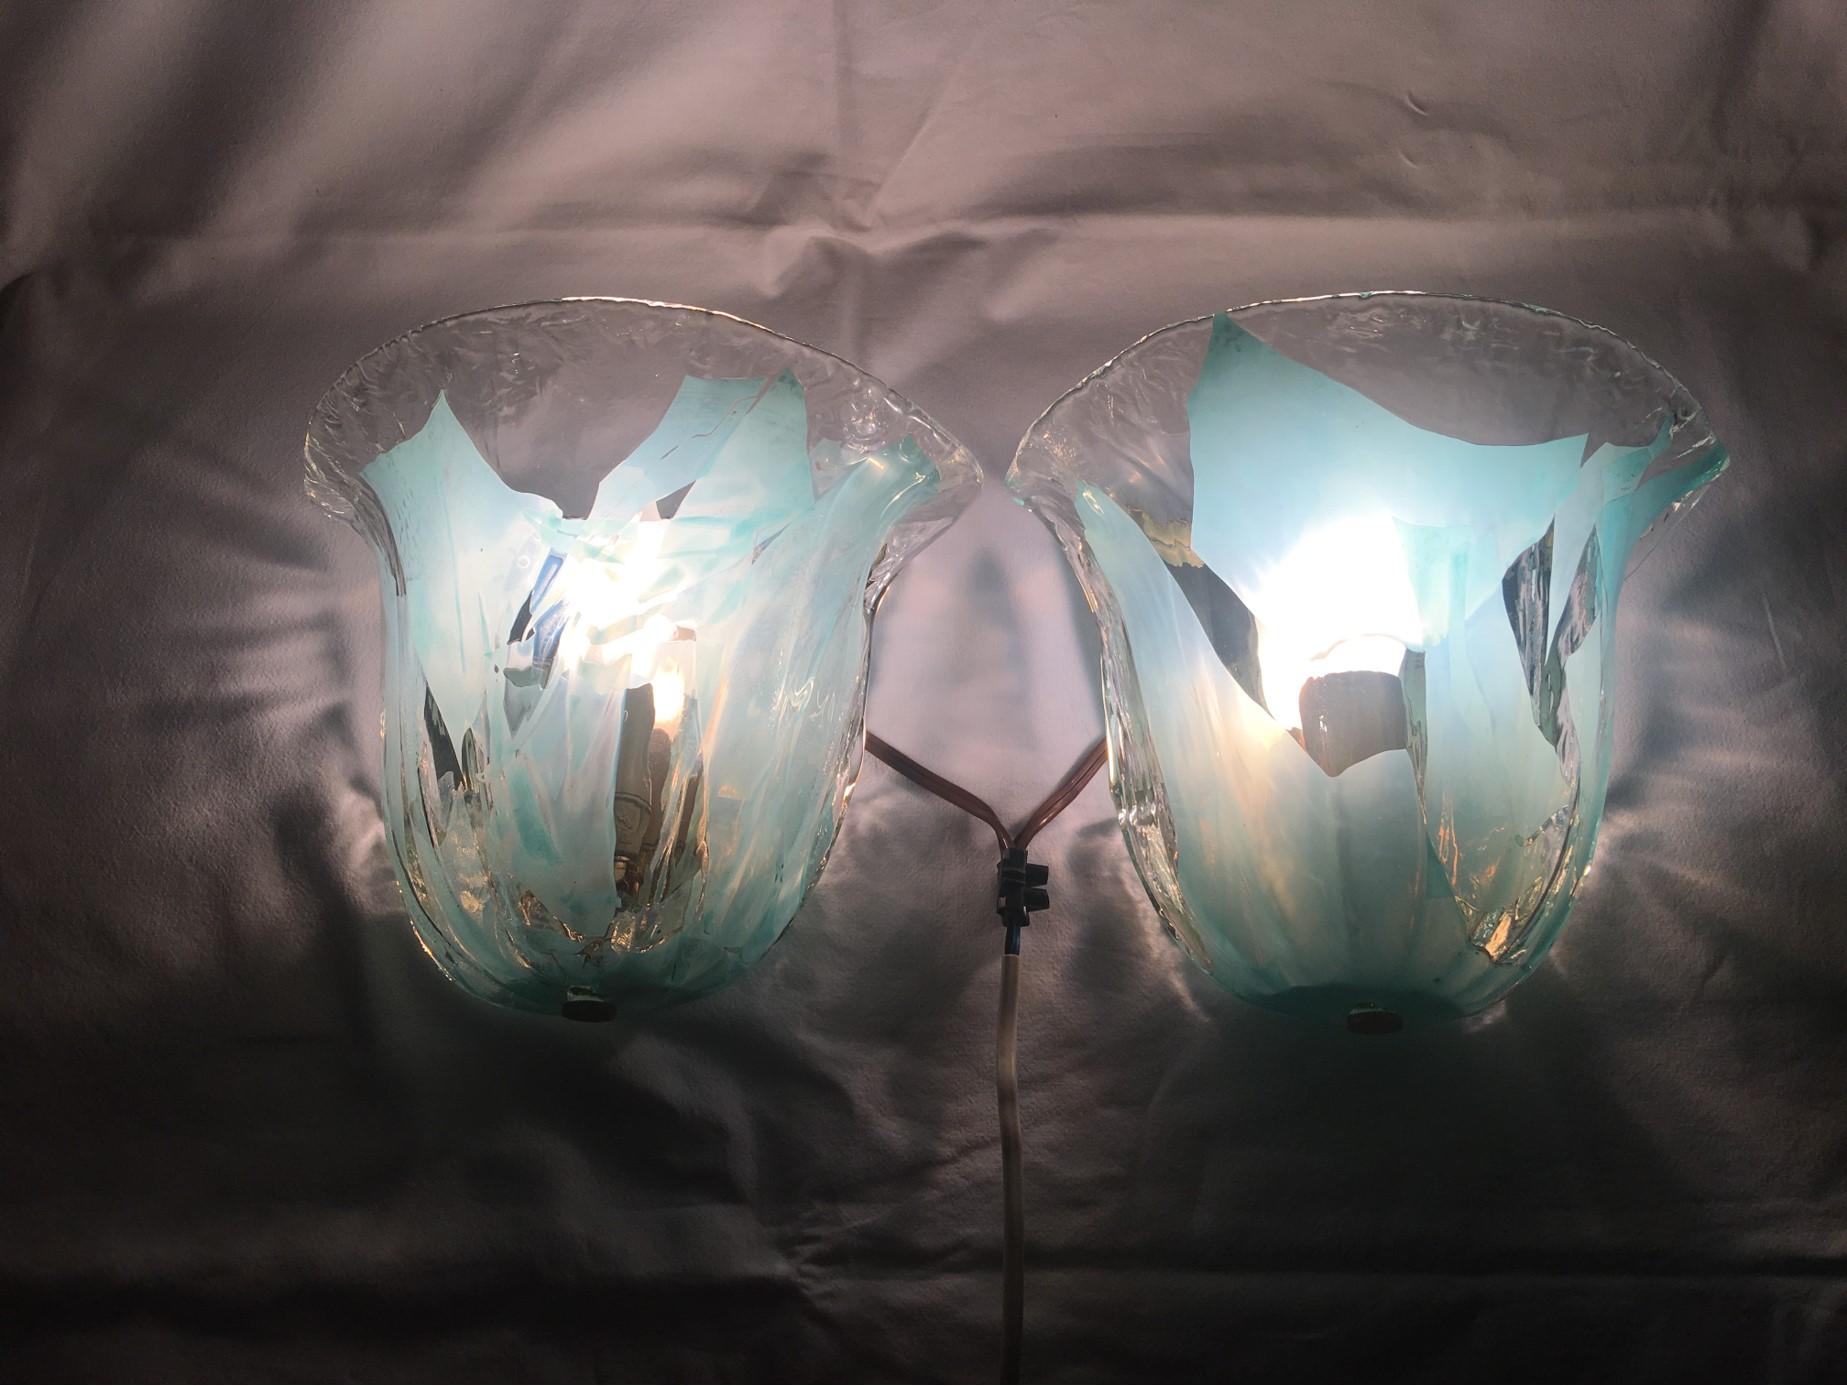 Rewired to meet US standards this lovely set of clear and turquoise glass sconces are an elegant addition to your home. Each fixture requires a European E 14 candelabra bulb with a max of 40 watts each. Very nice set. Shipped to you from Europe.